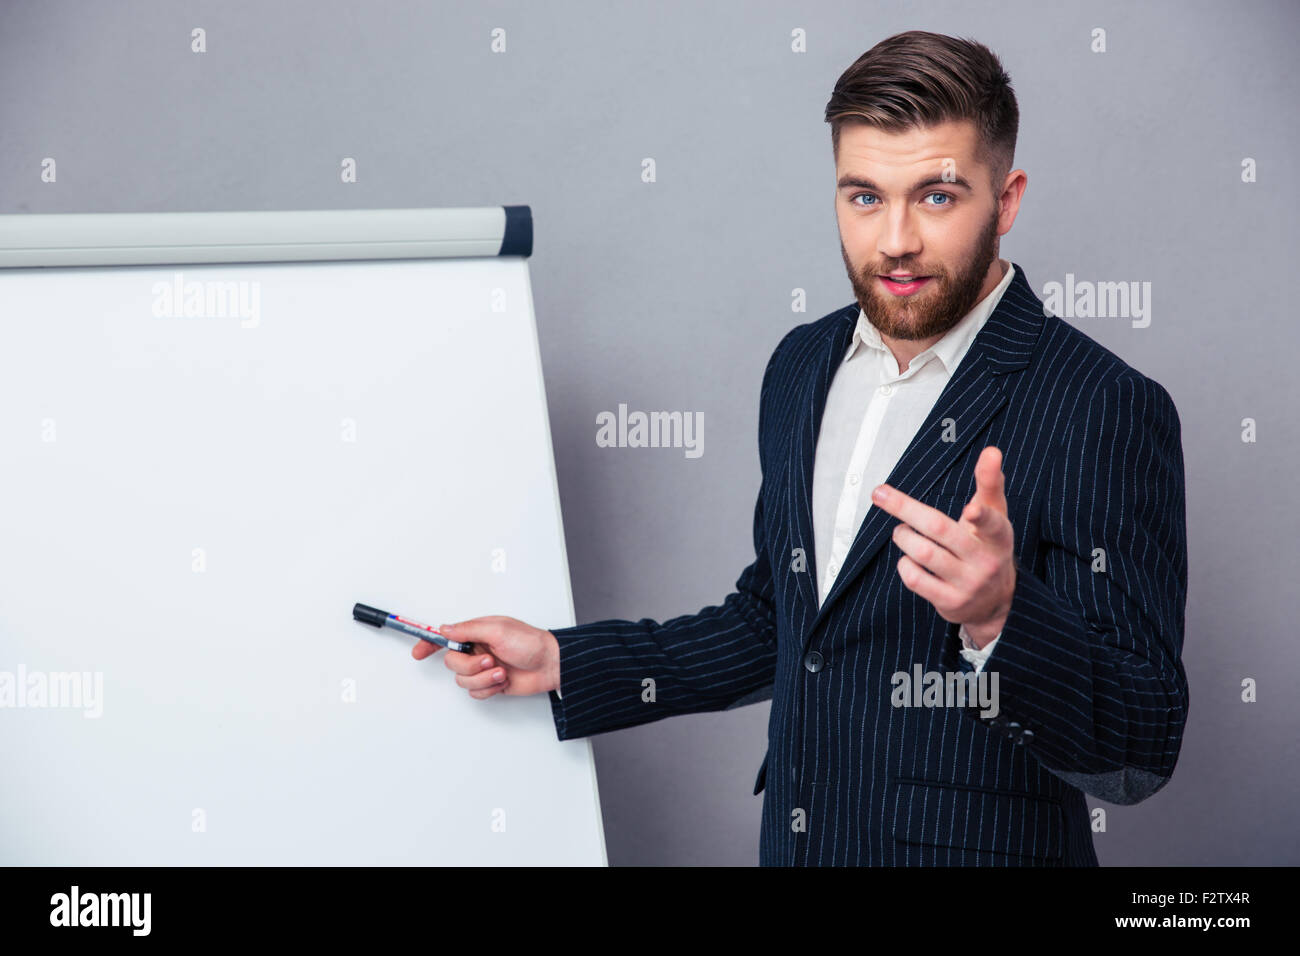 Portrait of a young businessman in suit presenting something on blank board over gray background Stock Photo